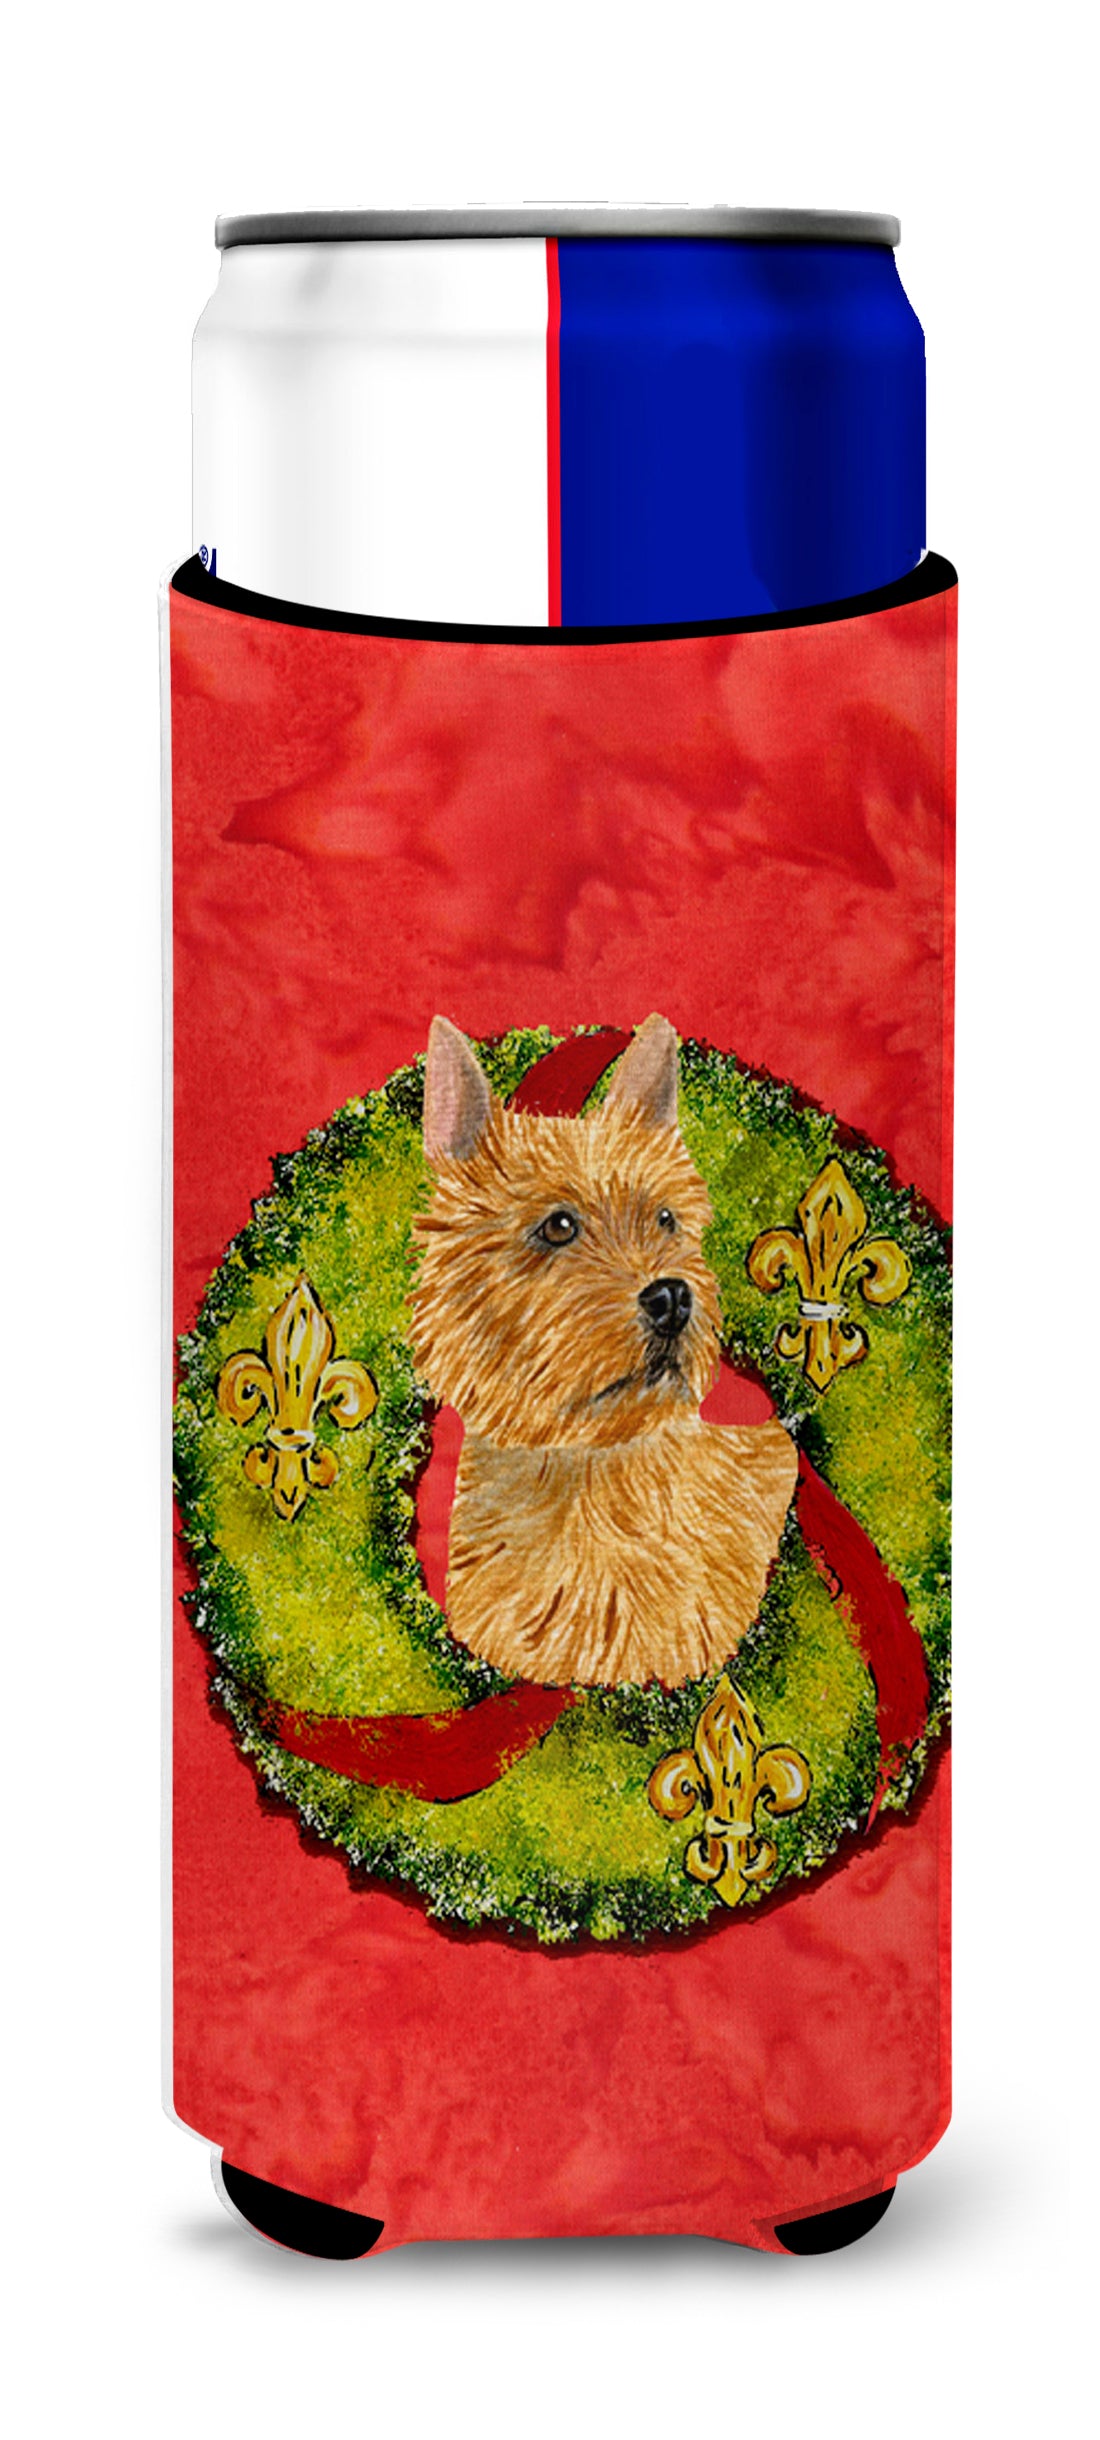 Norwich Terrier Cristmas Wreath Ultra Beverage Insulators for slim cans SS4188MUK.